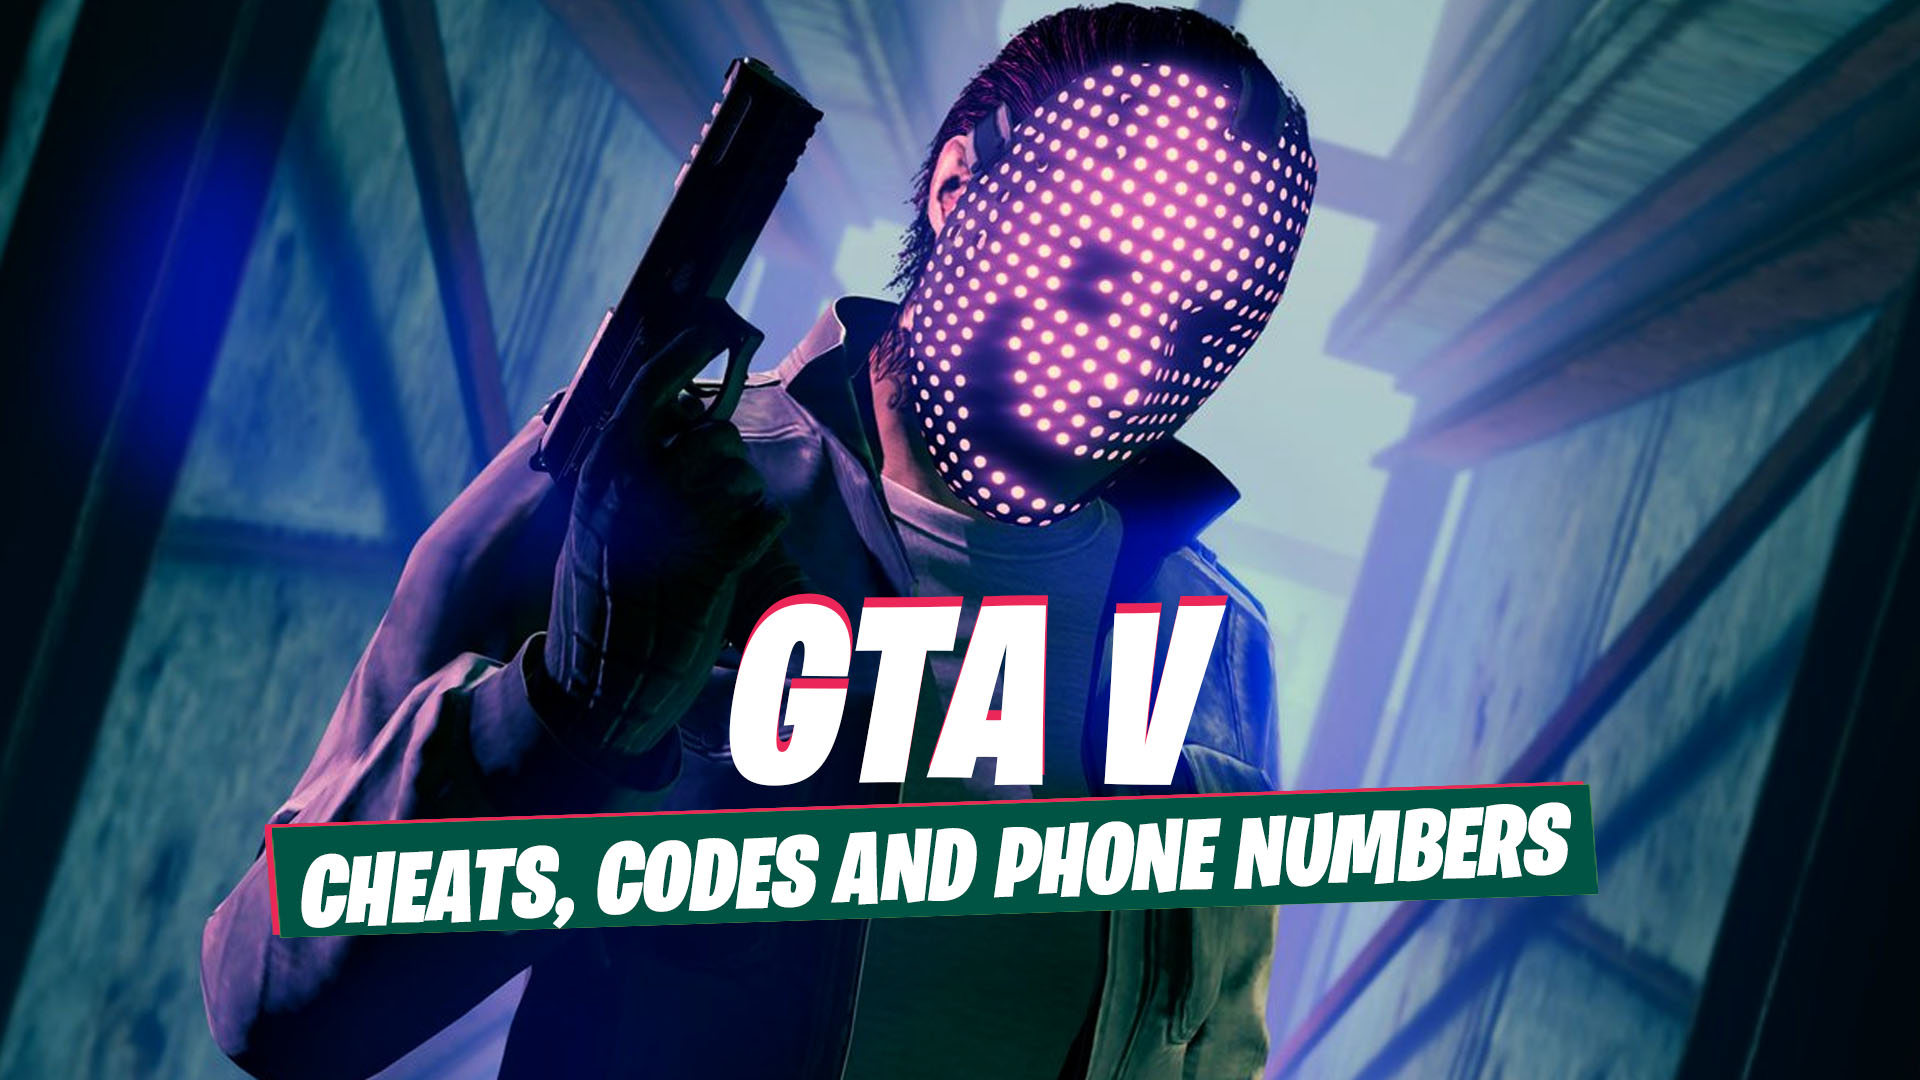 Gta 5 Best Cheats Codes And Phone Numbers The West News